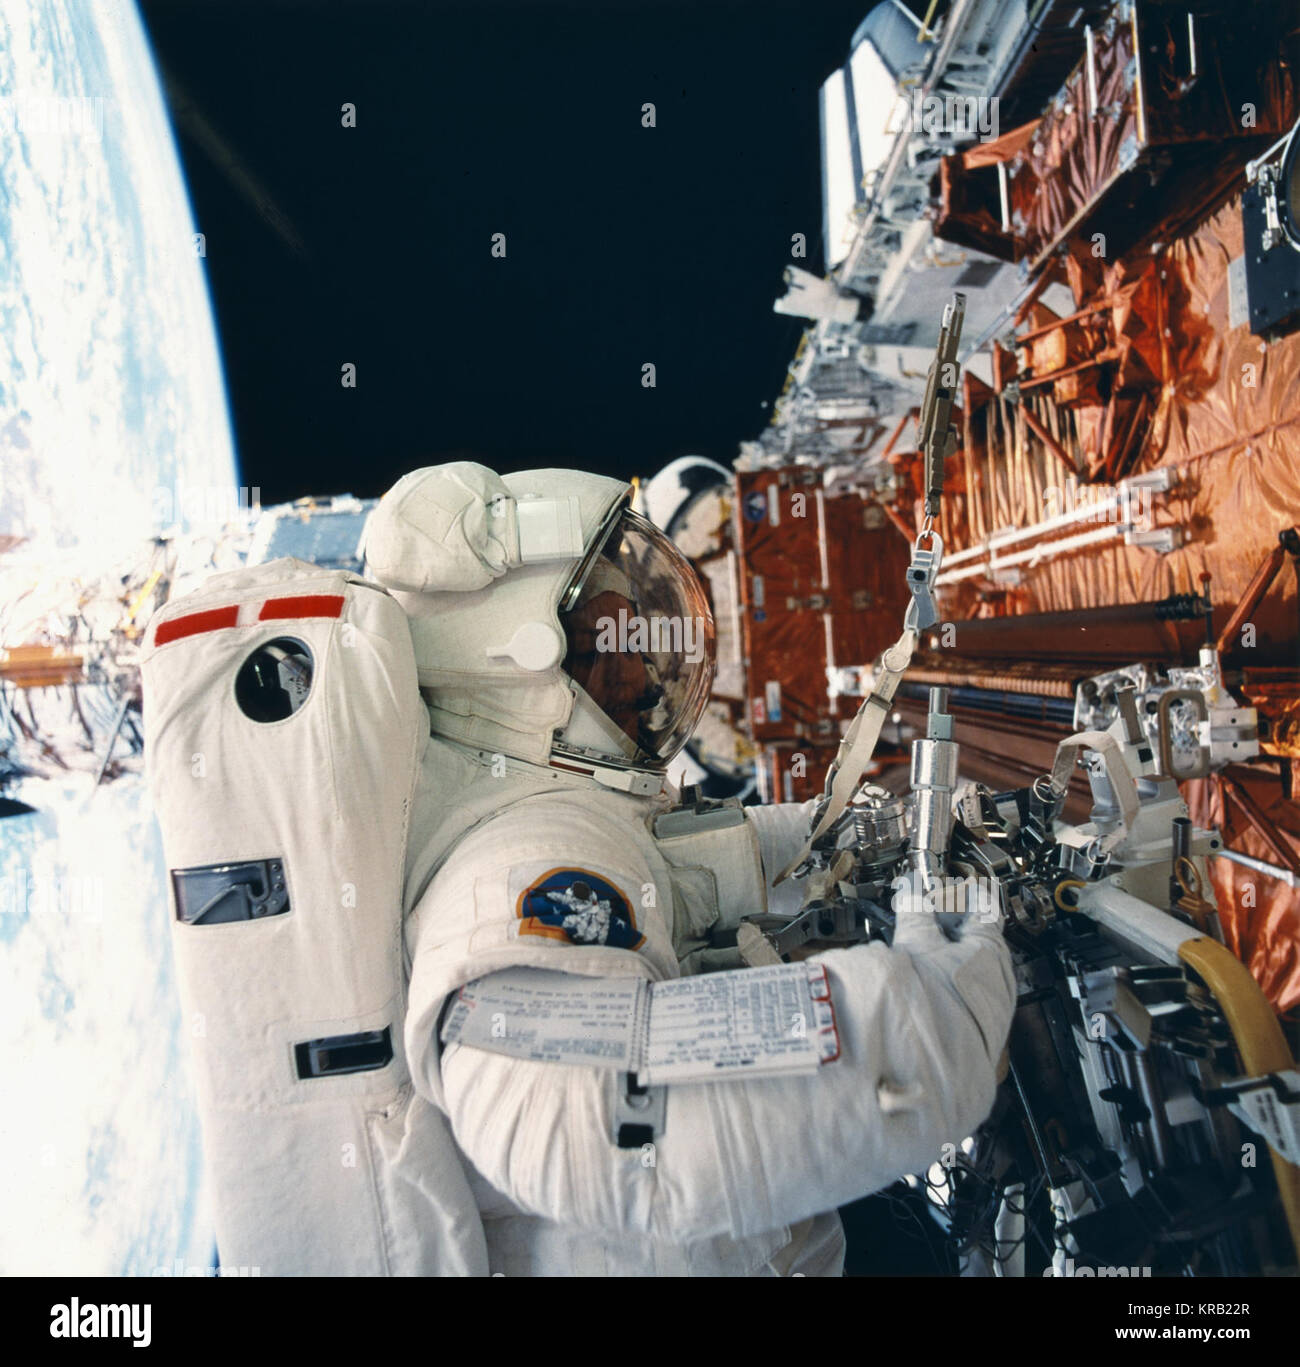 STS-61 EVA VIEW-ASTRONAUT THORNTON, KATHY WORKS WITH EQUIPMENT ASSOCIATED  WITH SERVICING CHORES ON THE HUBBLE SPACE TELESCOPE. Kathryn Thornton  replacing the solar arrays of the Hubble space telescope during the STS-61  mission